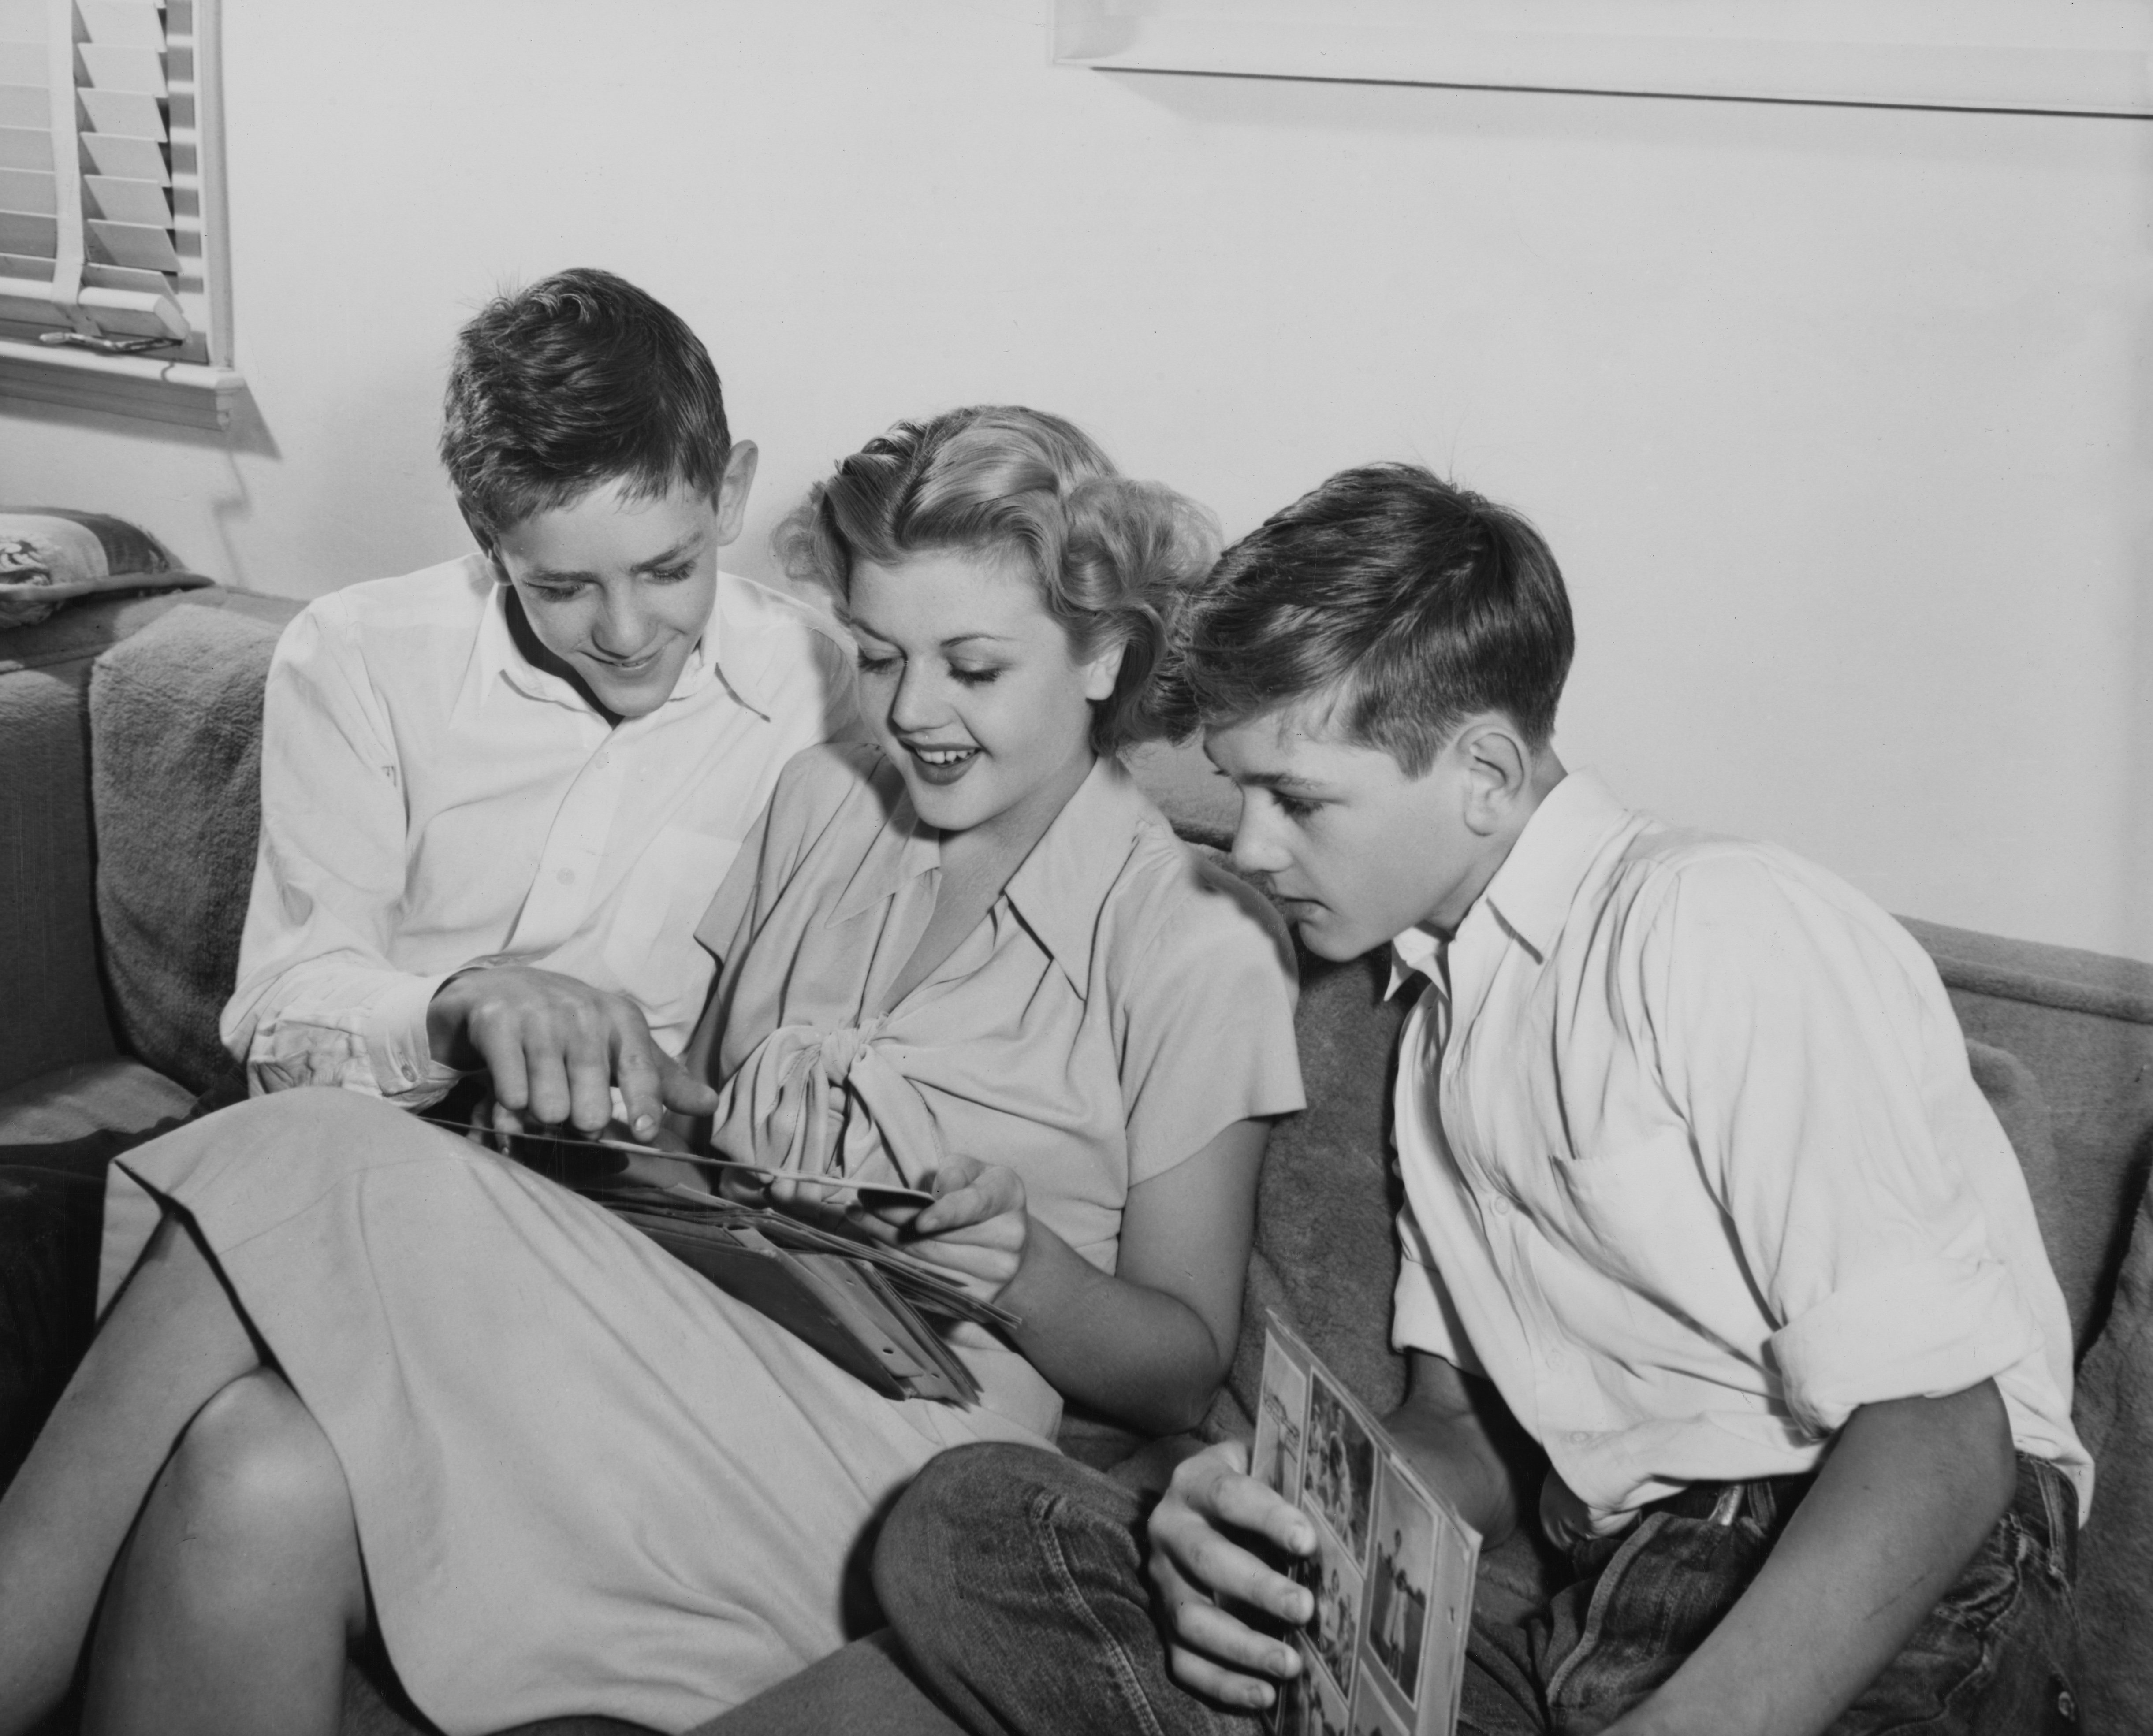 British-born Irish-American television producer and screenwriter Bruce Lansbury (1930-2017), with his sister Irish-British actress Angela Lansbury, and twin brother, British-born Irish-American film and television producer Edgar Lansbury, looking through a scrapbook at the family home in London, England, circa 1945. | Source: Getty Images